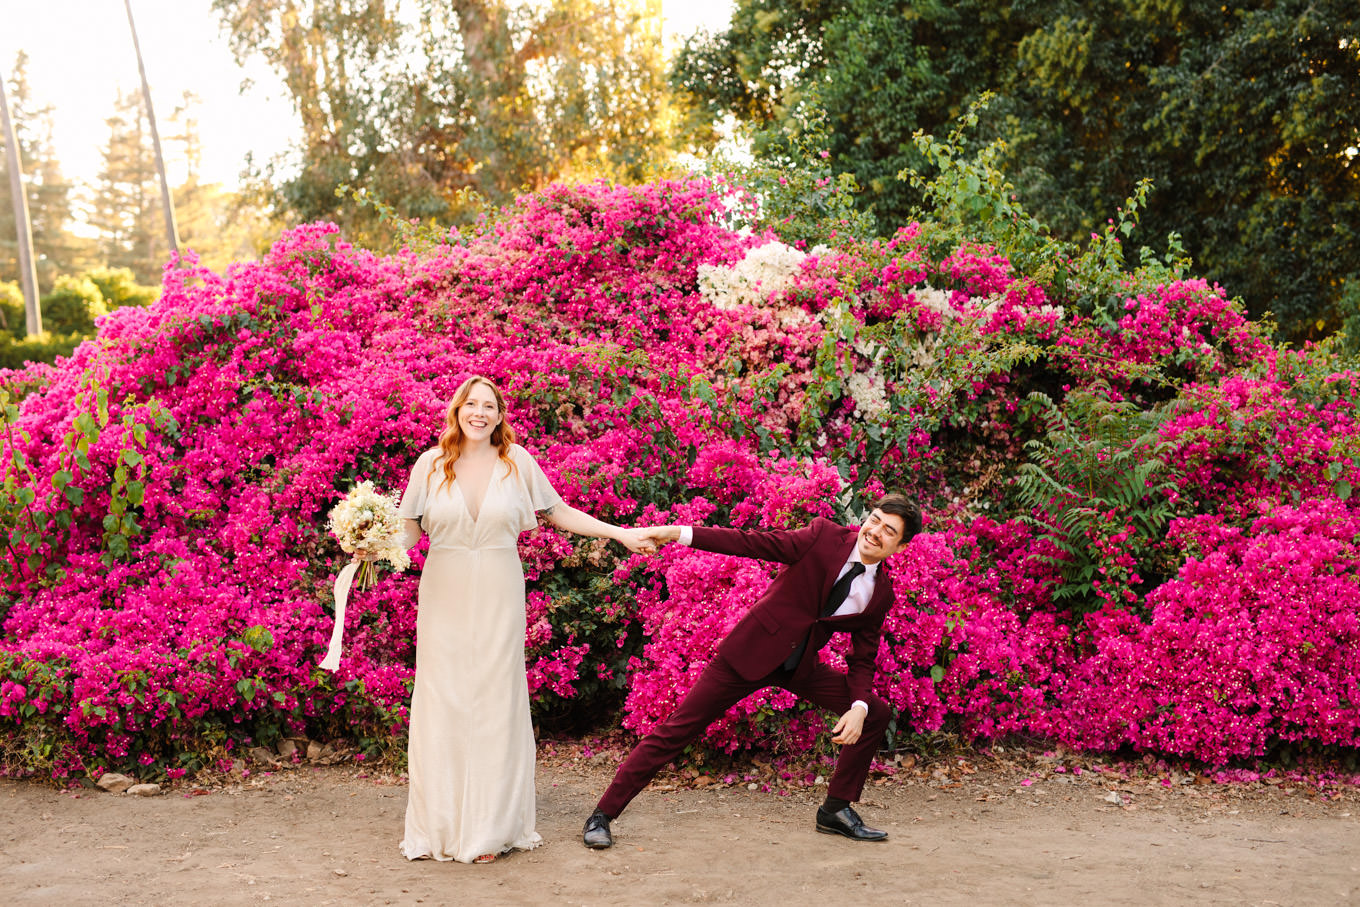 Los Angeles Arboretum elopement in front of bougainvillea | Engagement, elopement, and wedding photography roundup of Mary Costa’s favorite images from 2020 | Colorful and elevated photography for fun-loving couples in Southern California | #2020wedding #elopement #weddingphoto #weddingphotography #microwedding   Source: Mary Costa Photography | Los Angeles